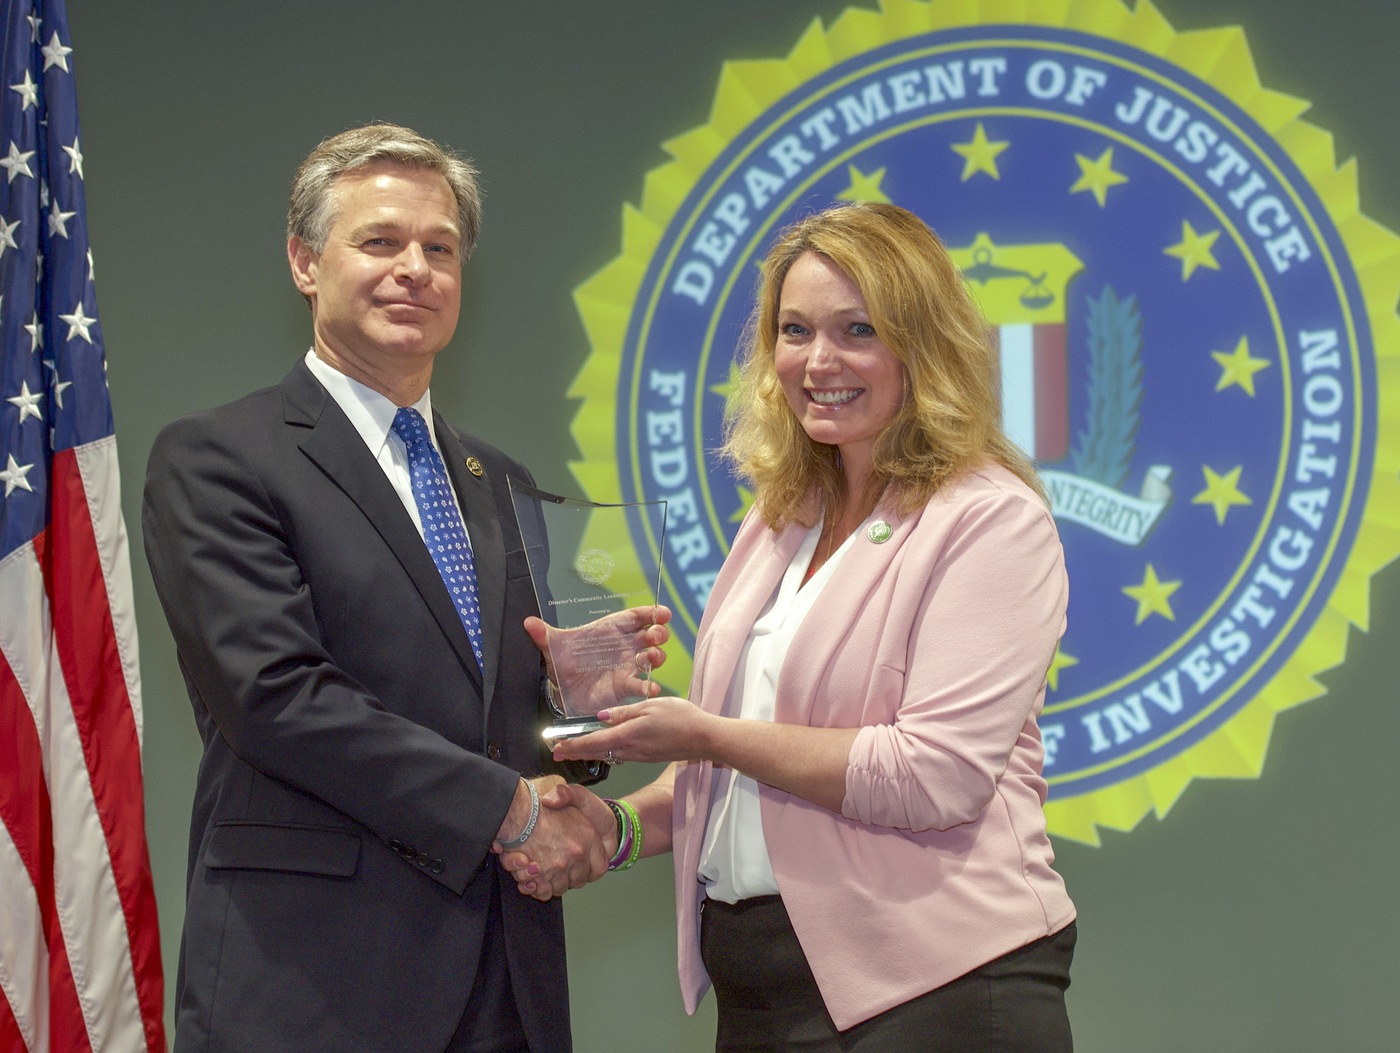 FBI Director Christopher Wray presents New Haven Division recipient Sandy Hook Promise (represented by Nicole Hockley) with the Director’s Community Leadership Award (DCLA) at a ceremony at FBI Headquarters on May 3, 2019.